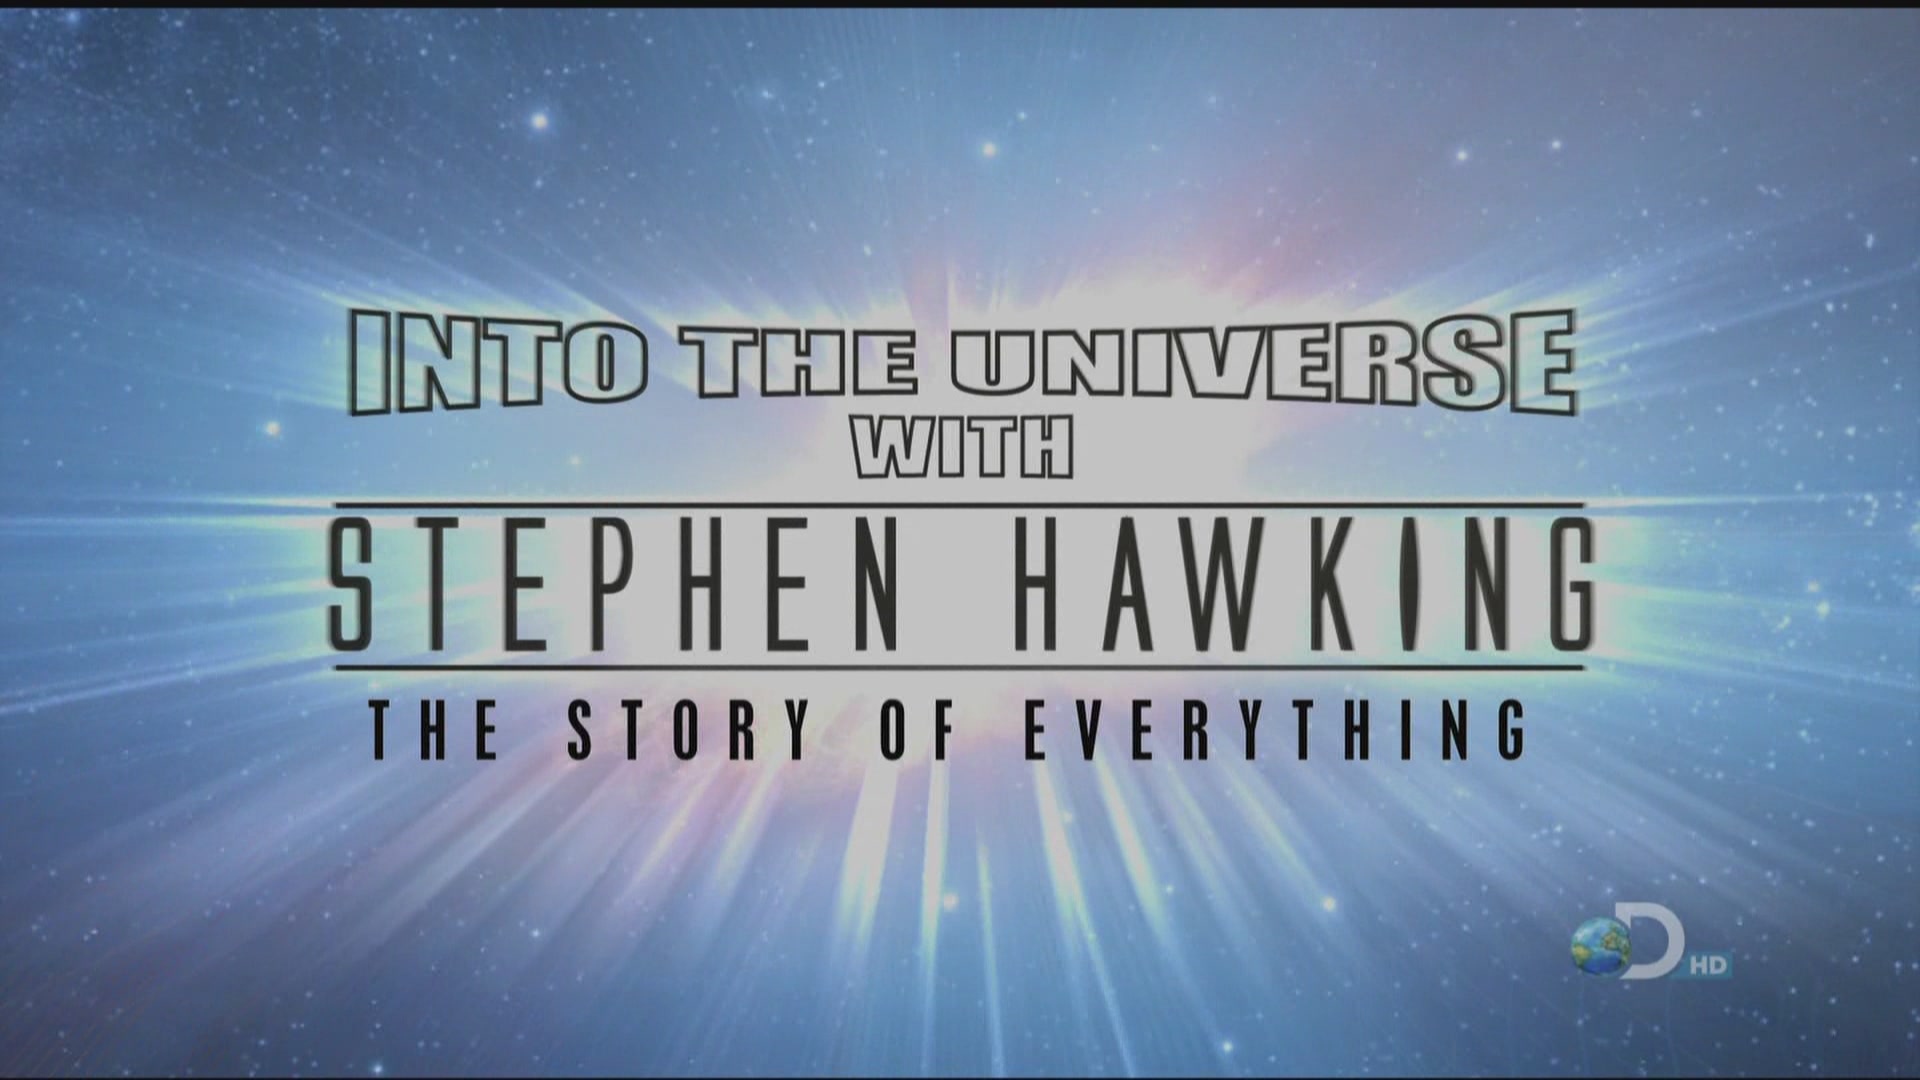 Into the Universe With Stephen Hawking S01E03 The Story of Everything01.JPG